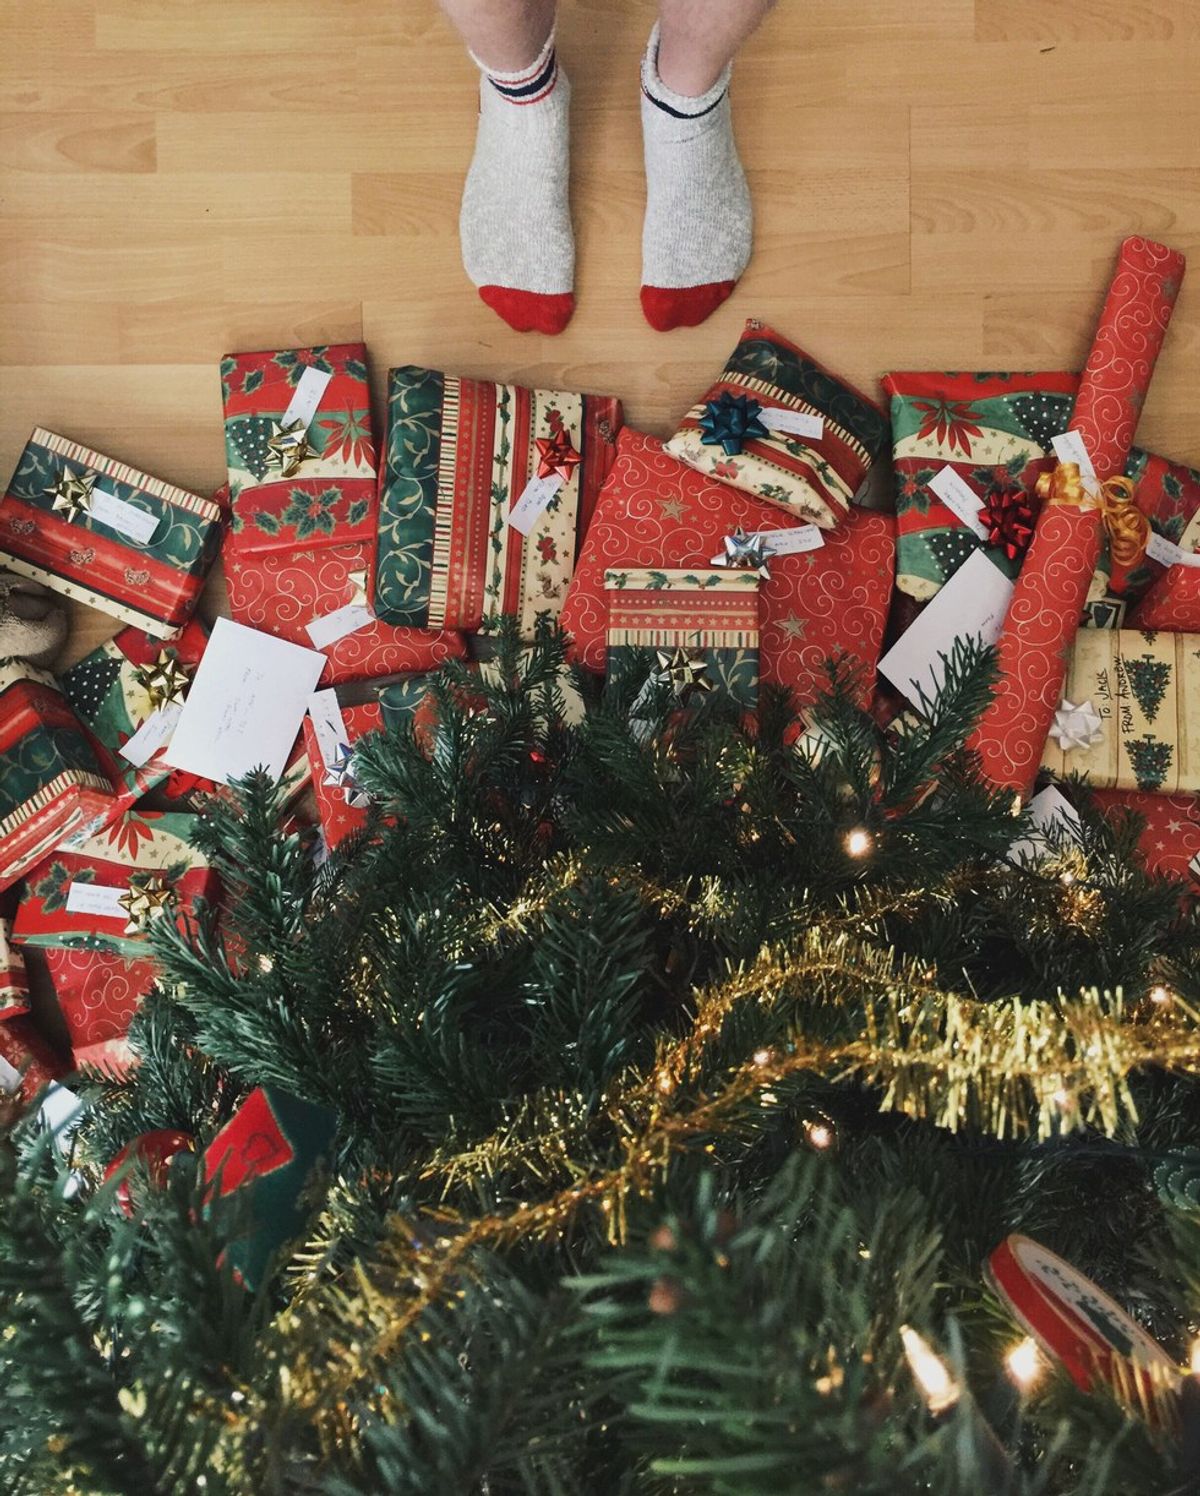 9 Tips For Buying The Perfect Secret Santa Gift